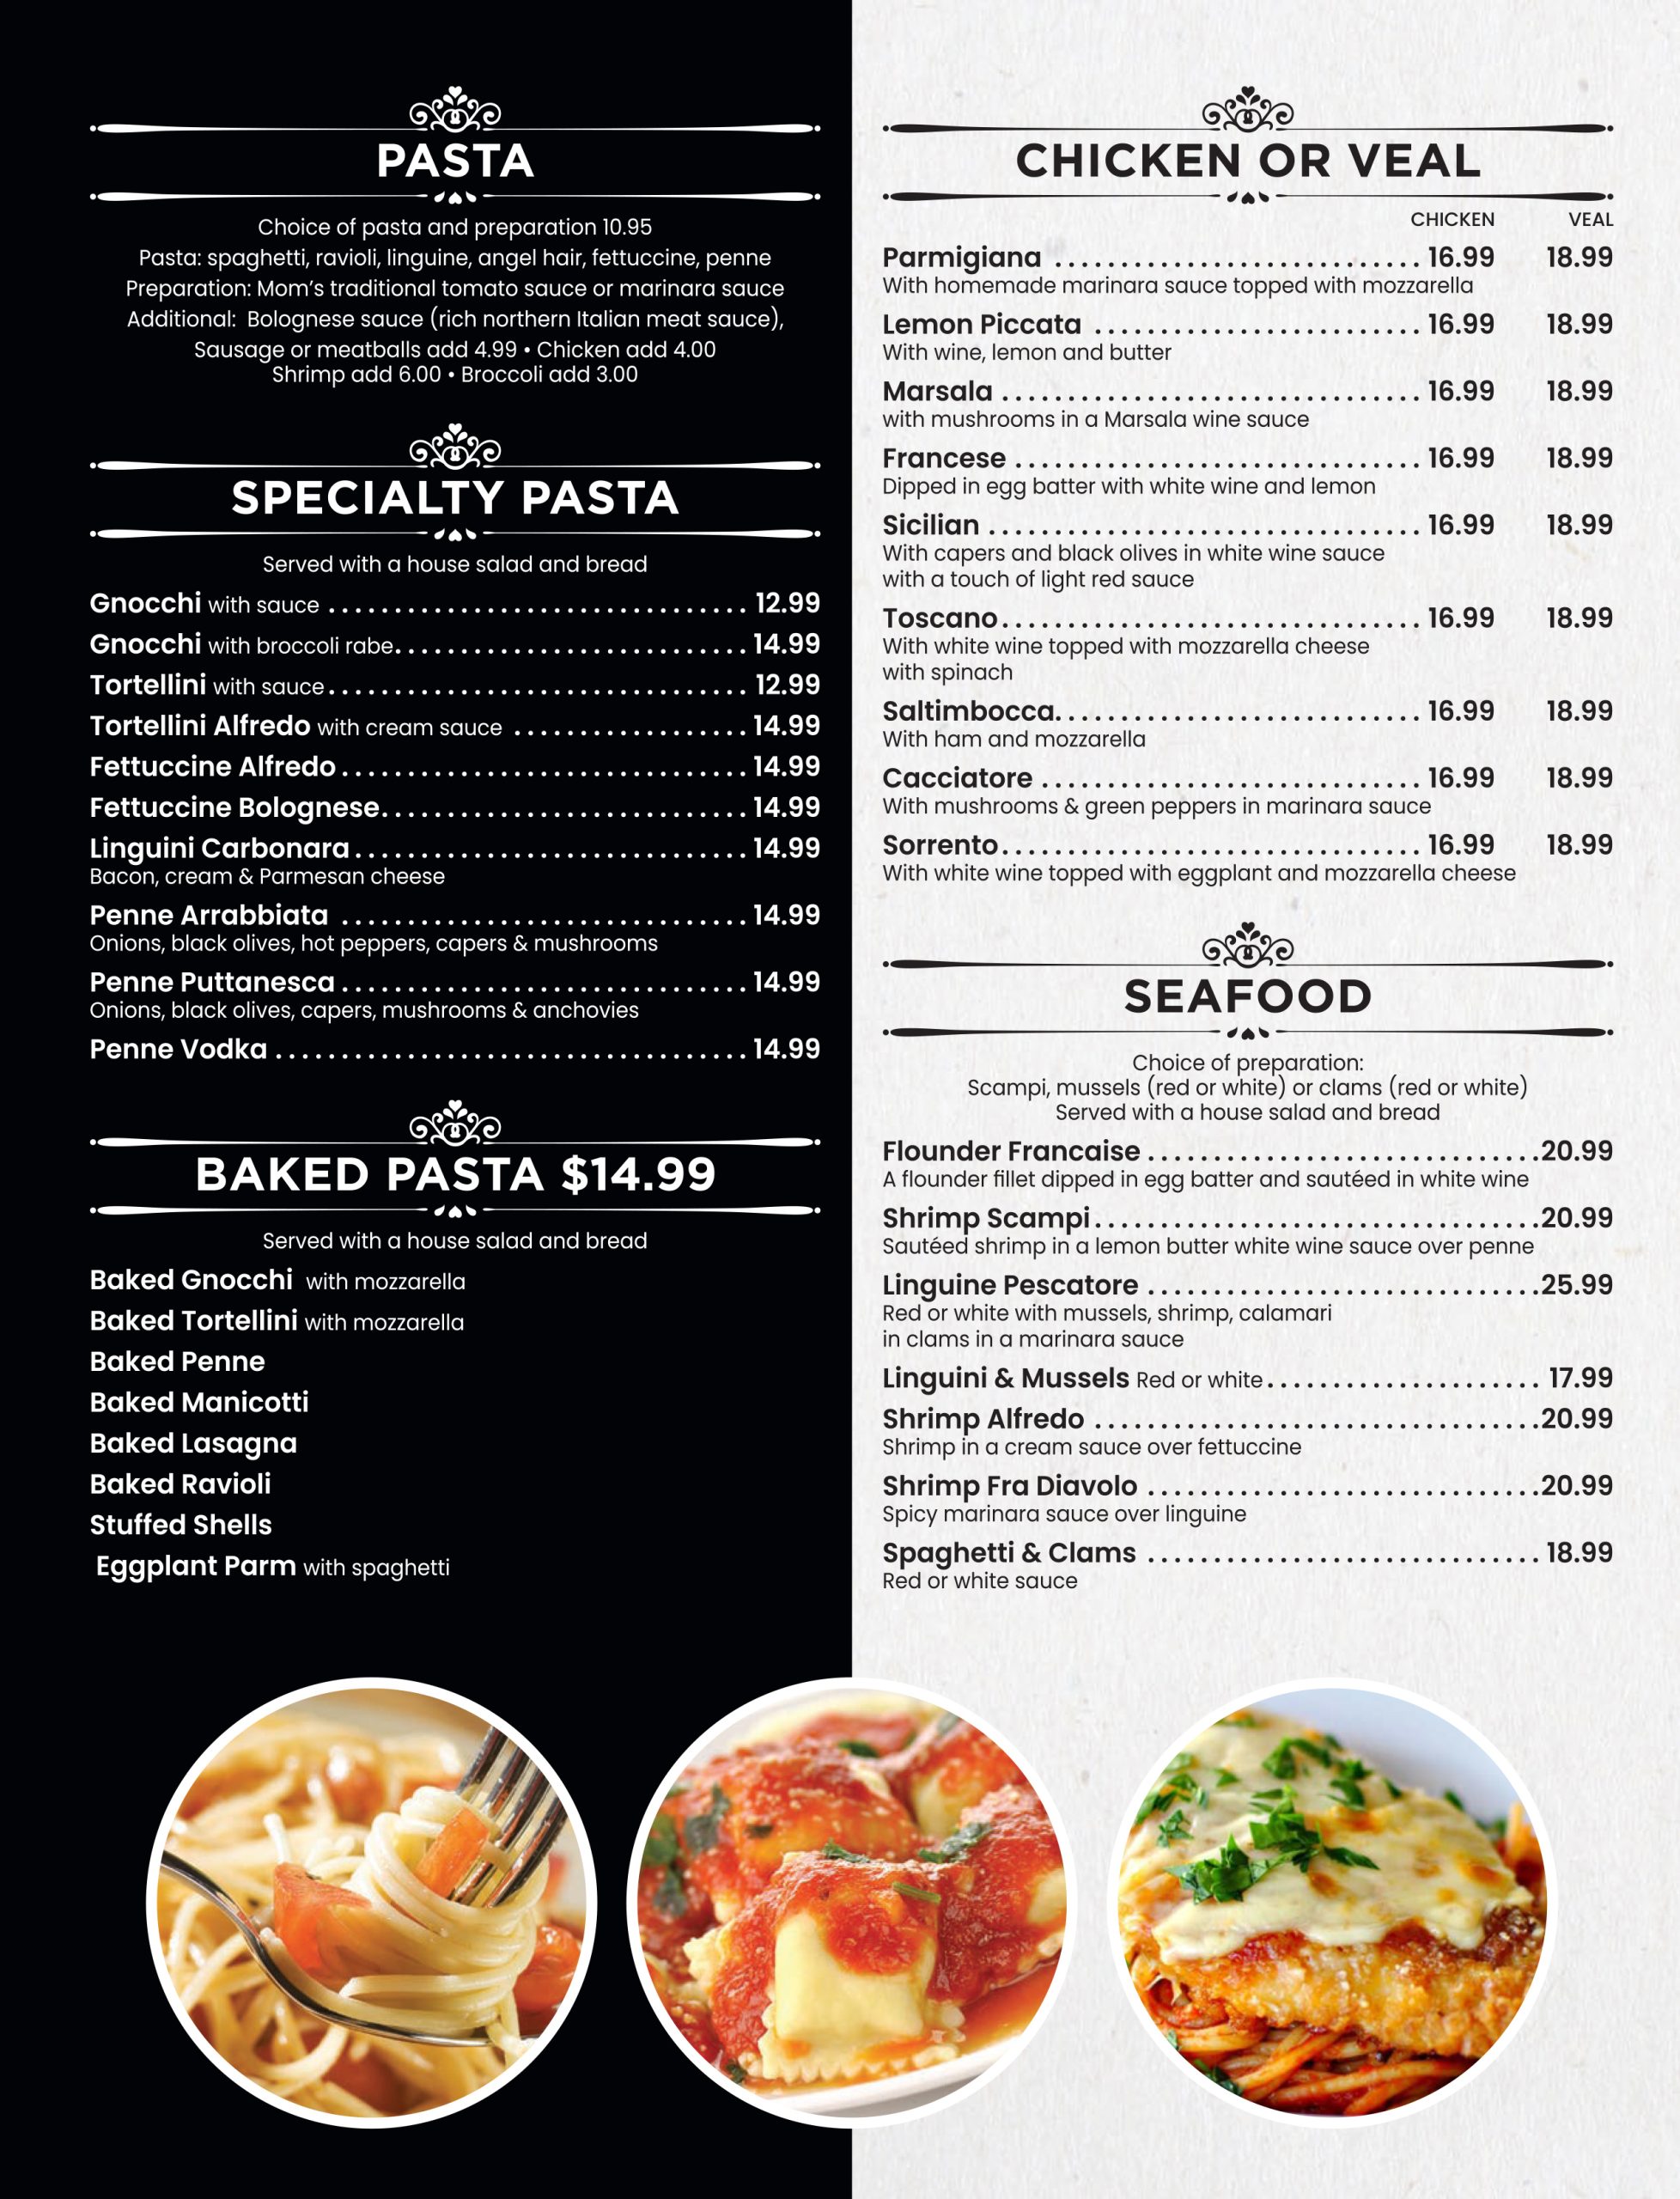 Menu page featuring a selection of italian dishes including pasta, chicken or veal, and seafood, with descriptions and prices.